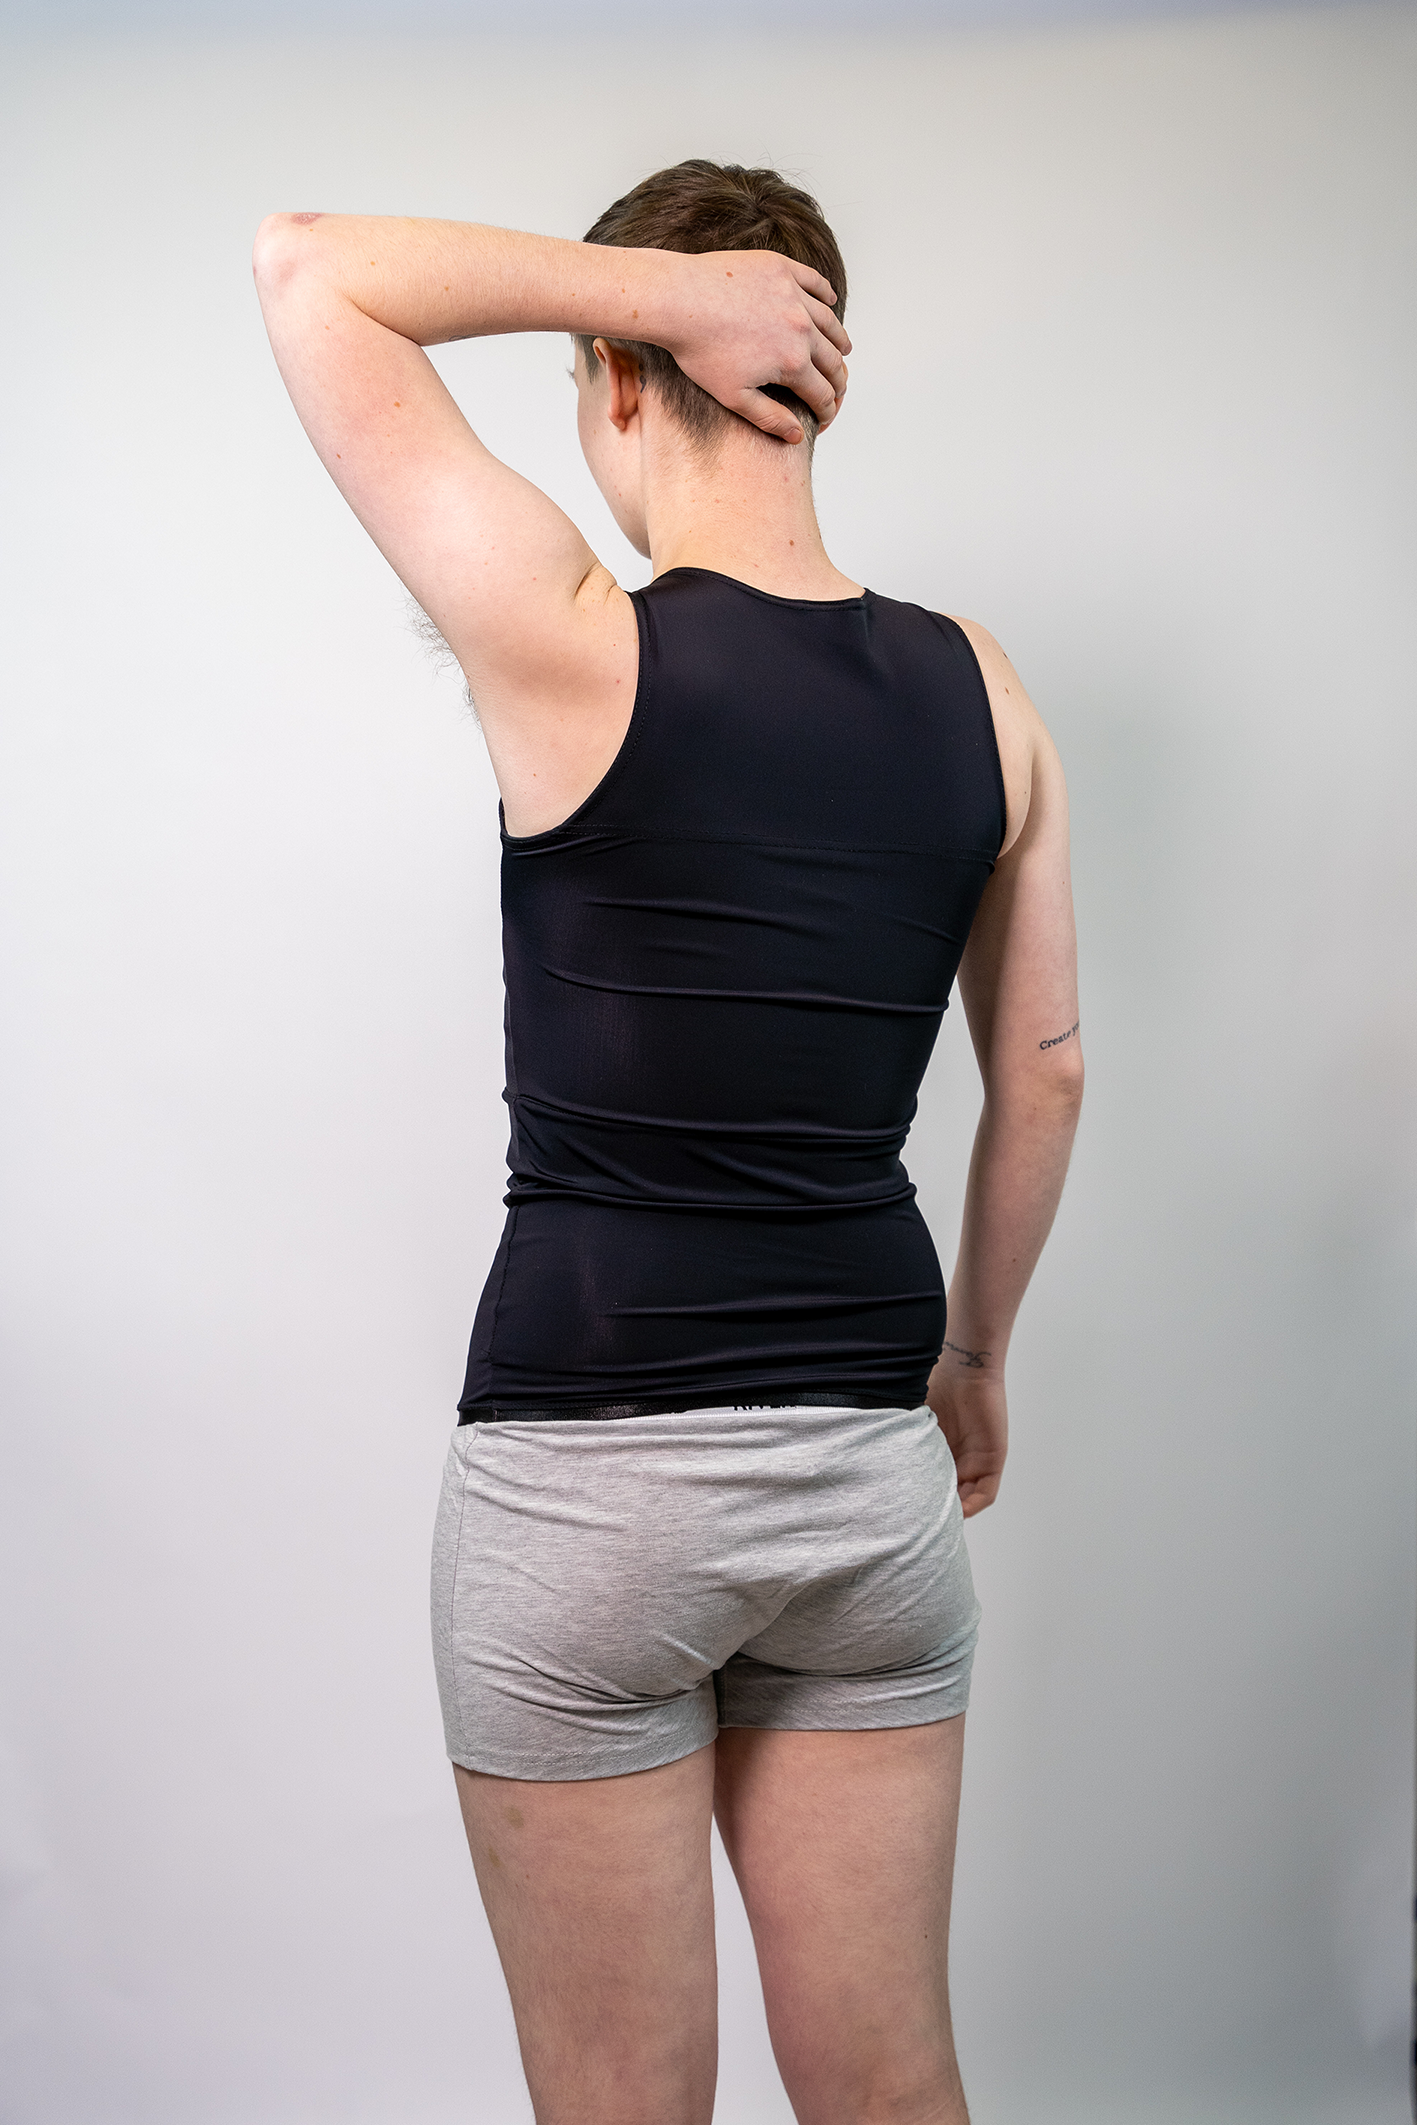 Long Black Chest Binder – Spectrum Outfitters